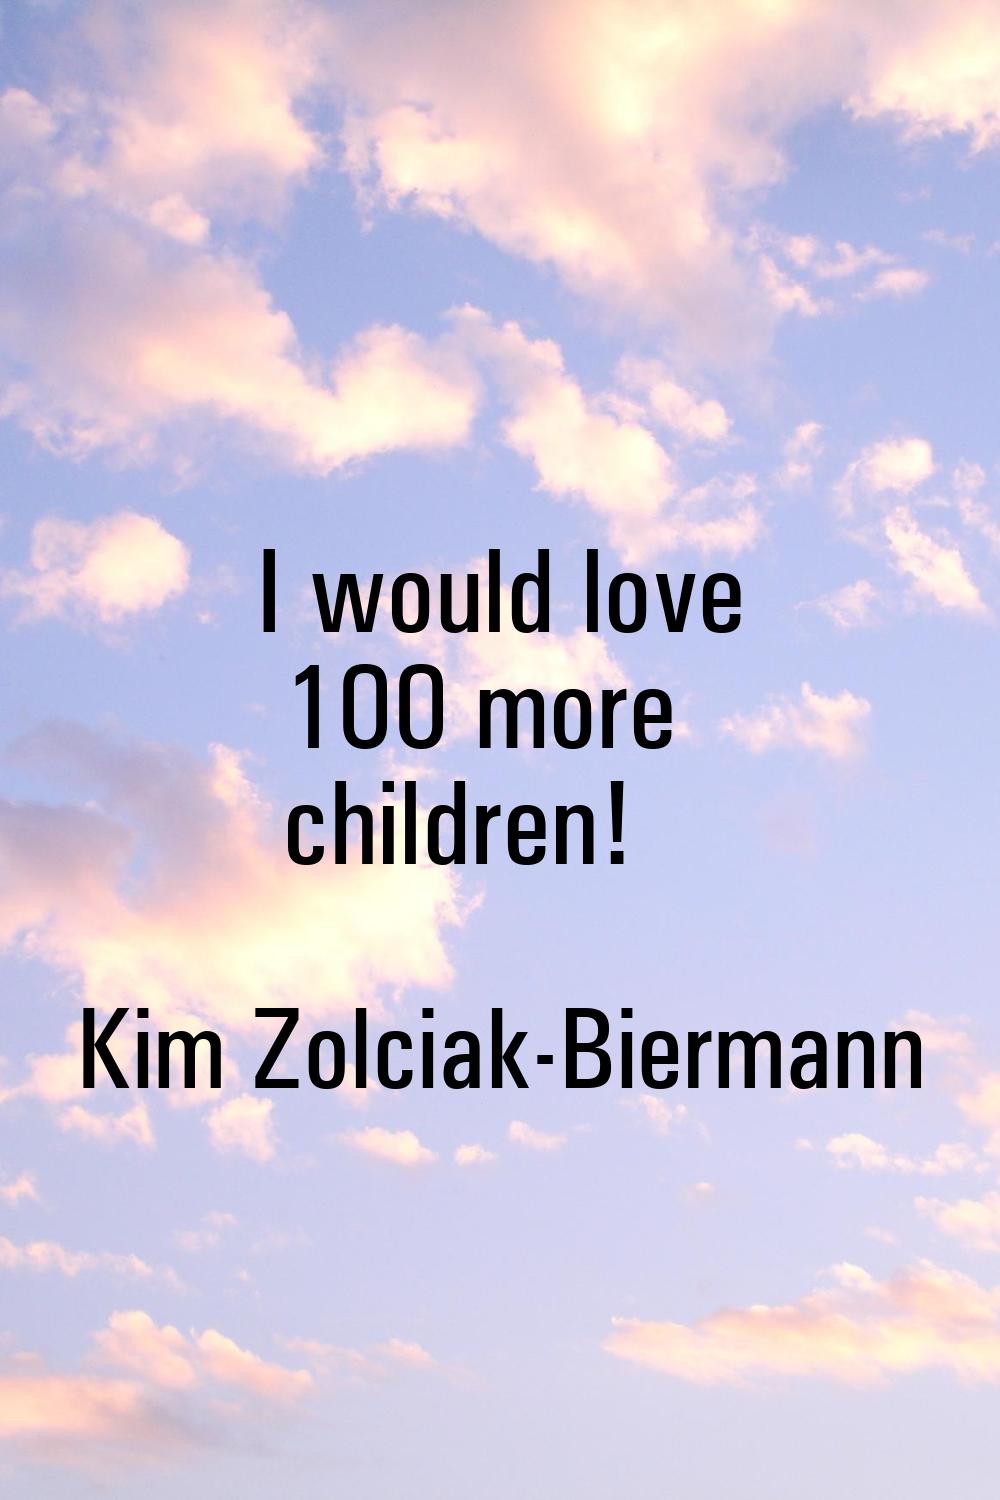 I would love 100 more children!